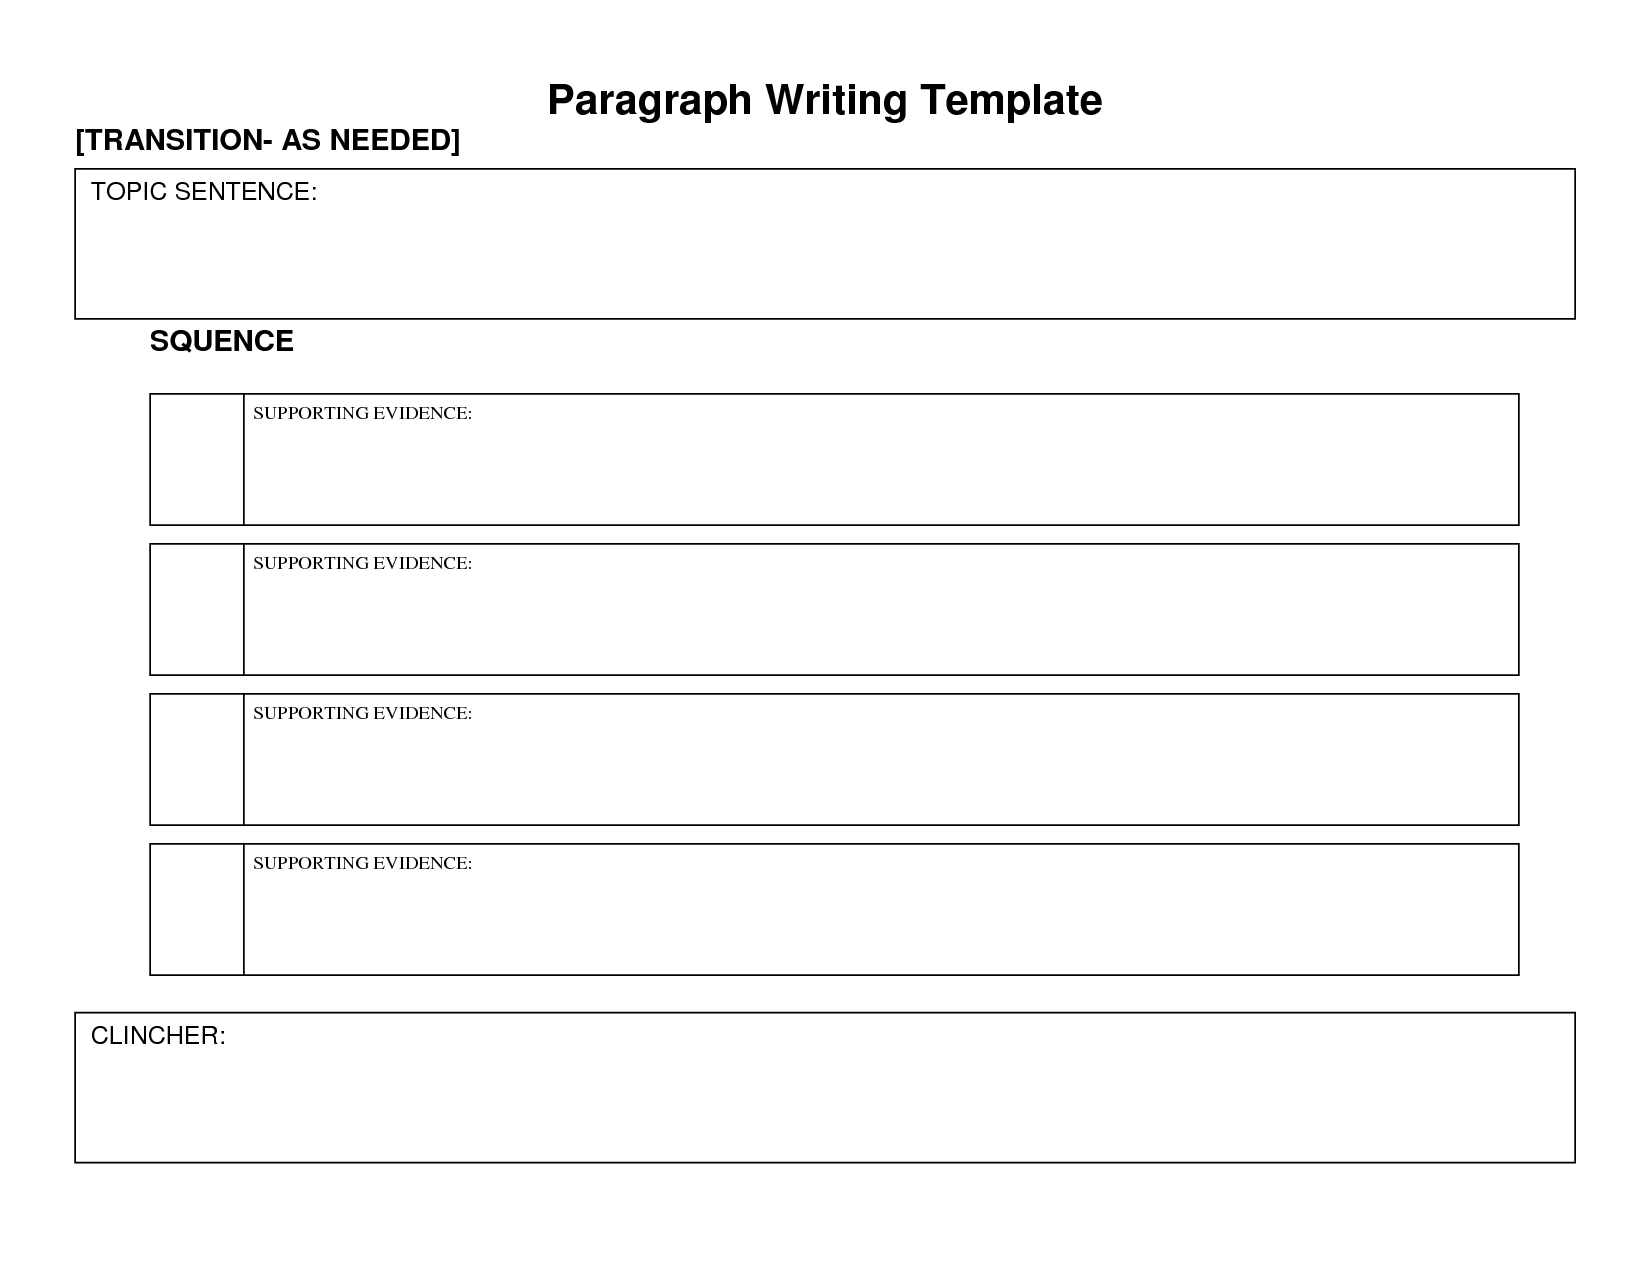 16-best-images-of-topic-sentences-worksheets-pdf-writing-topic